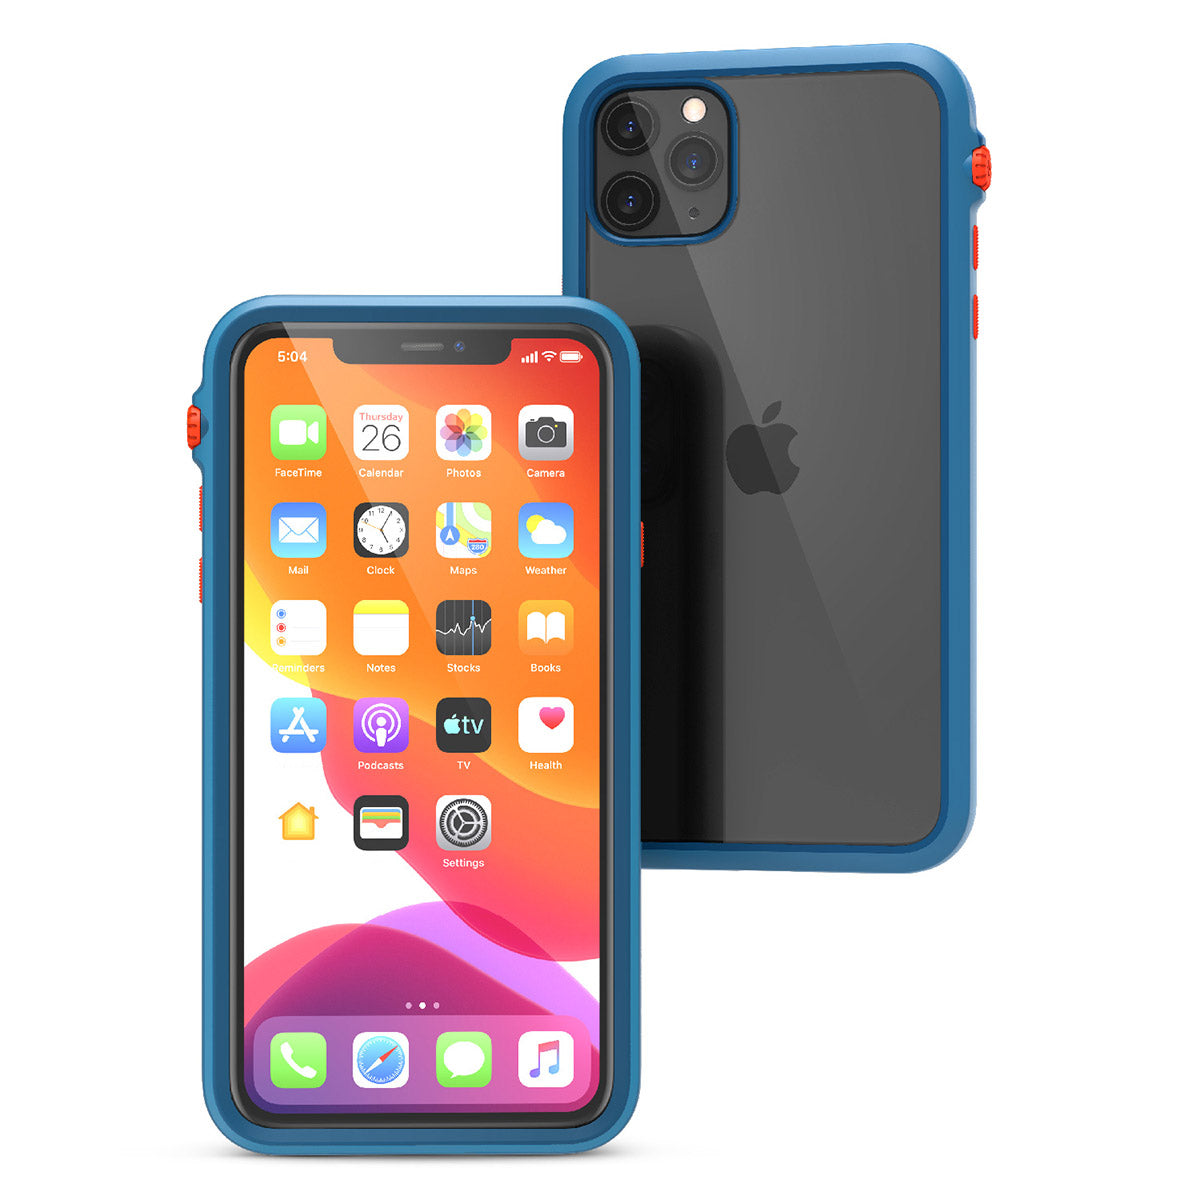 catalyst iPhone 11 series impact protection case bluerdige sunset for iPhone 11 pro max front and back view